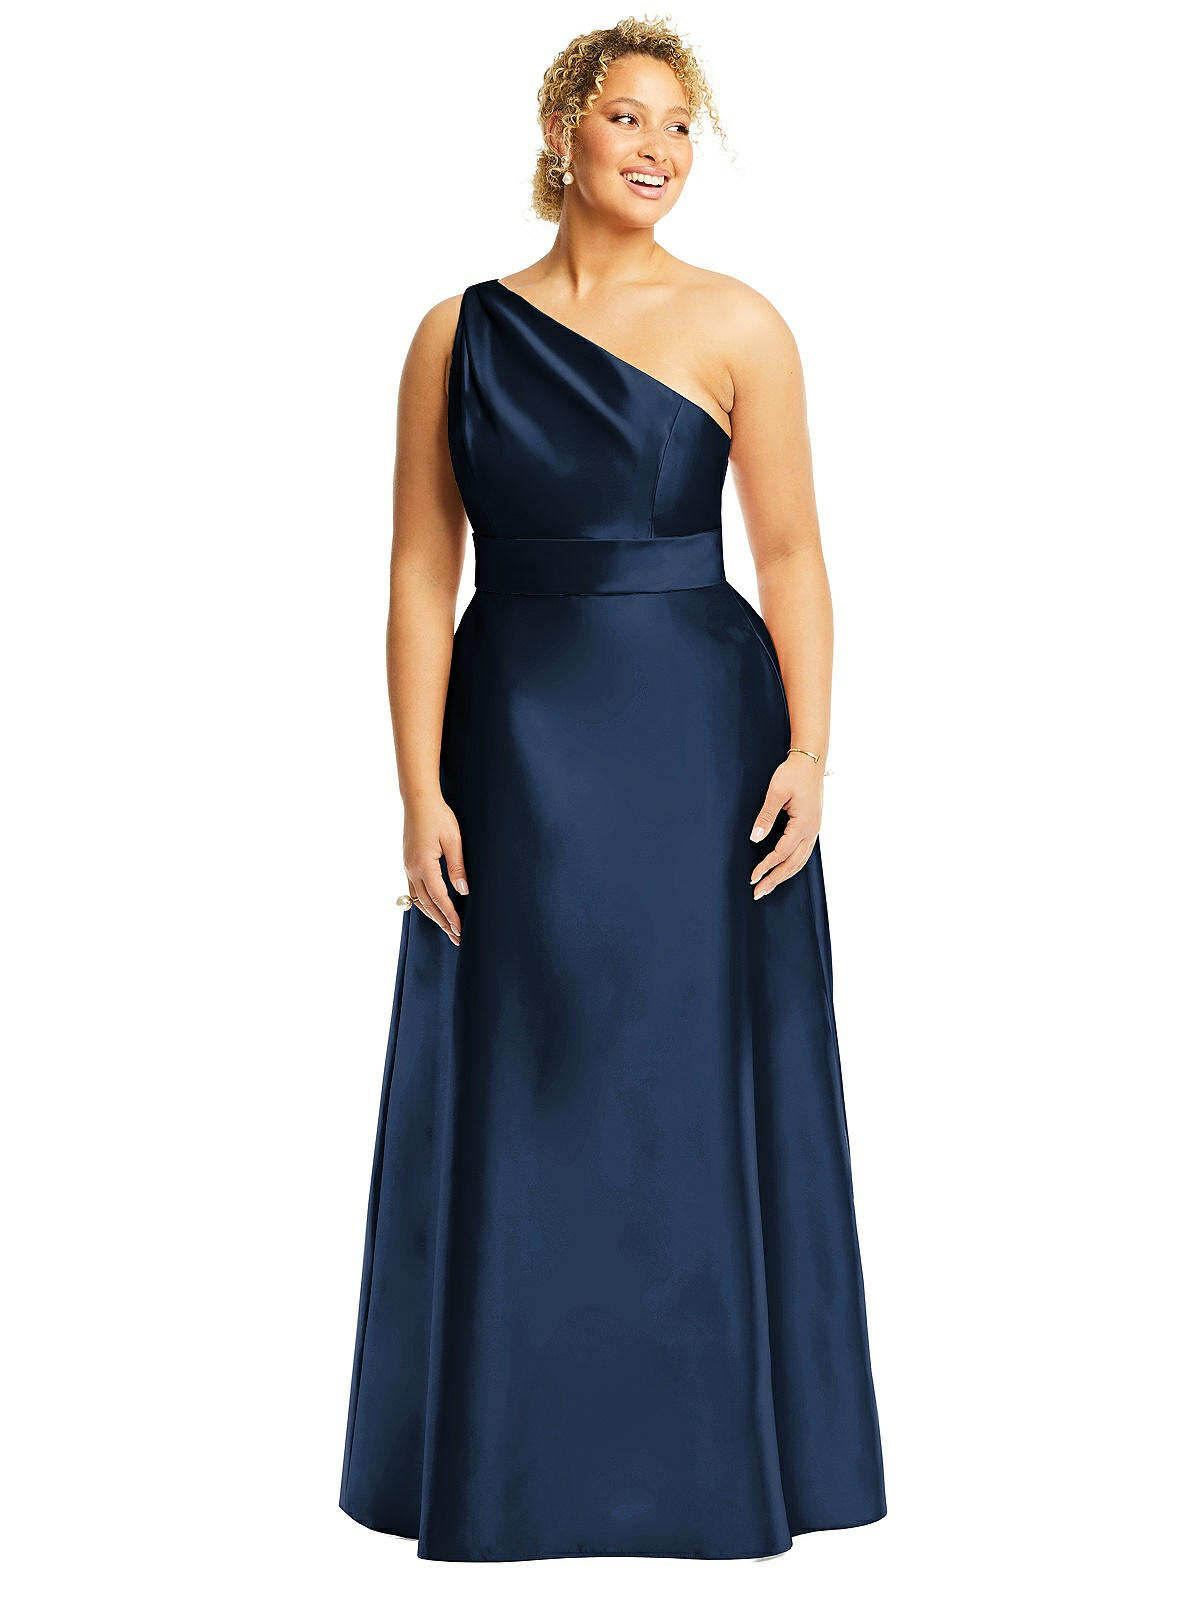 Bridesmaid Draped Midnight Dress Dessy Satin Group With Pockets One-shoulder Navy Maxi & The In Navy | Midnight